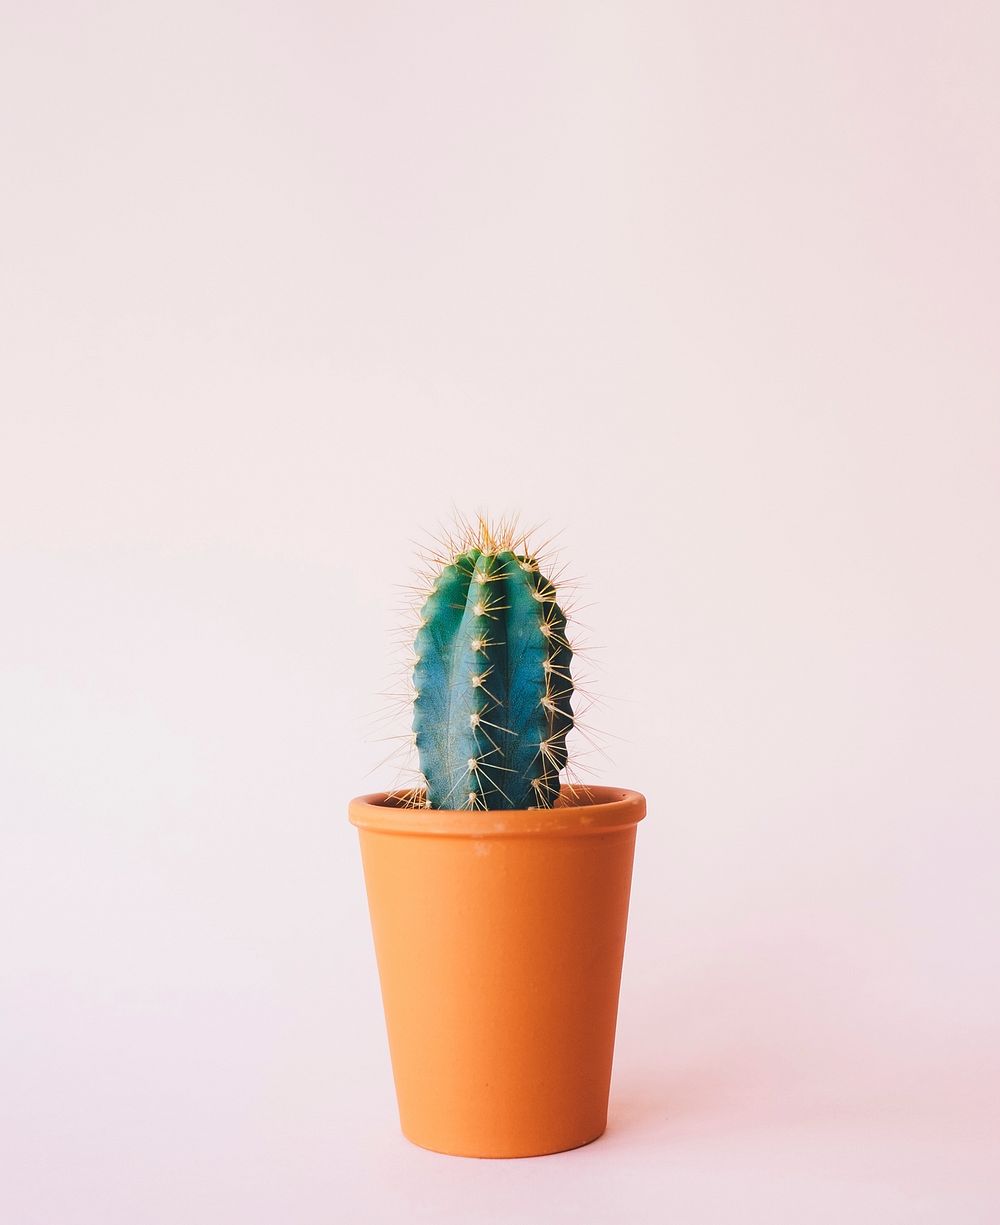 Potted cactus background. Original public domain image from Wikimedia Commons